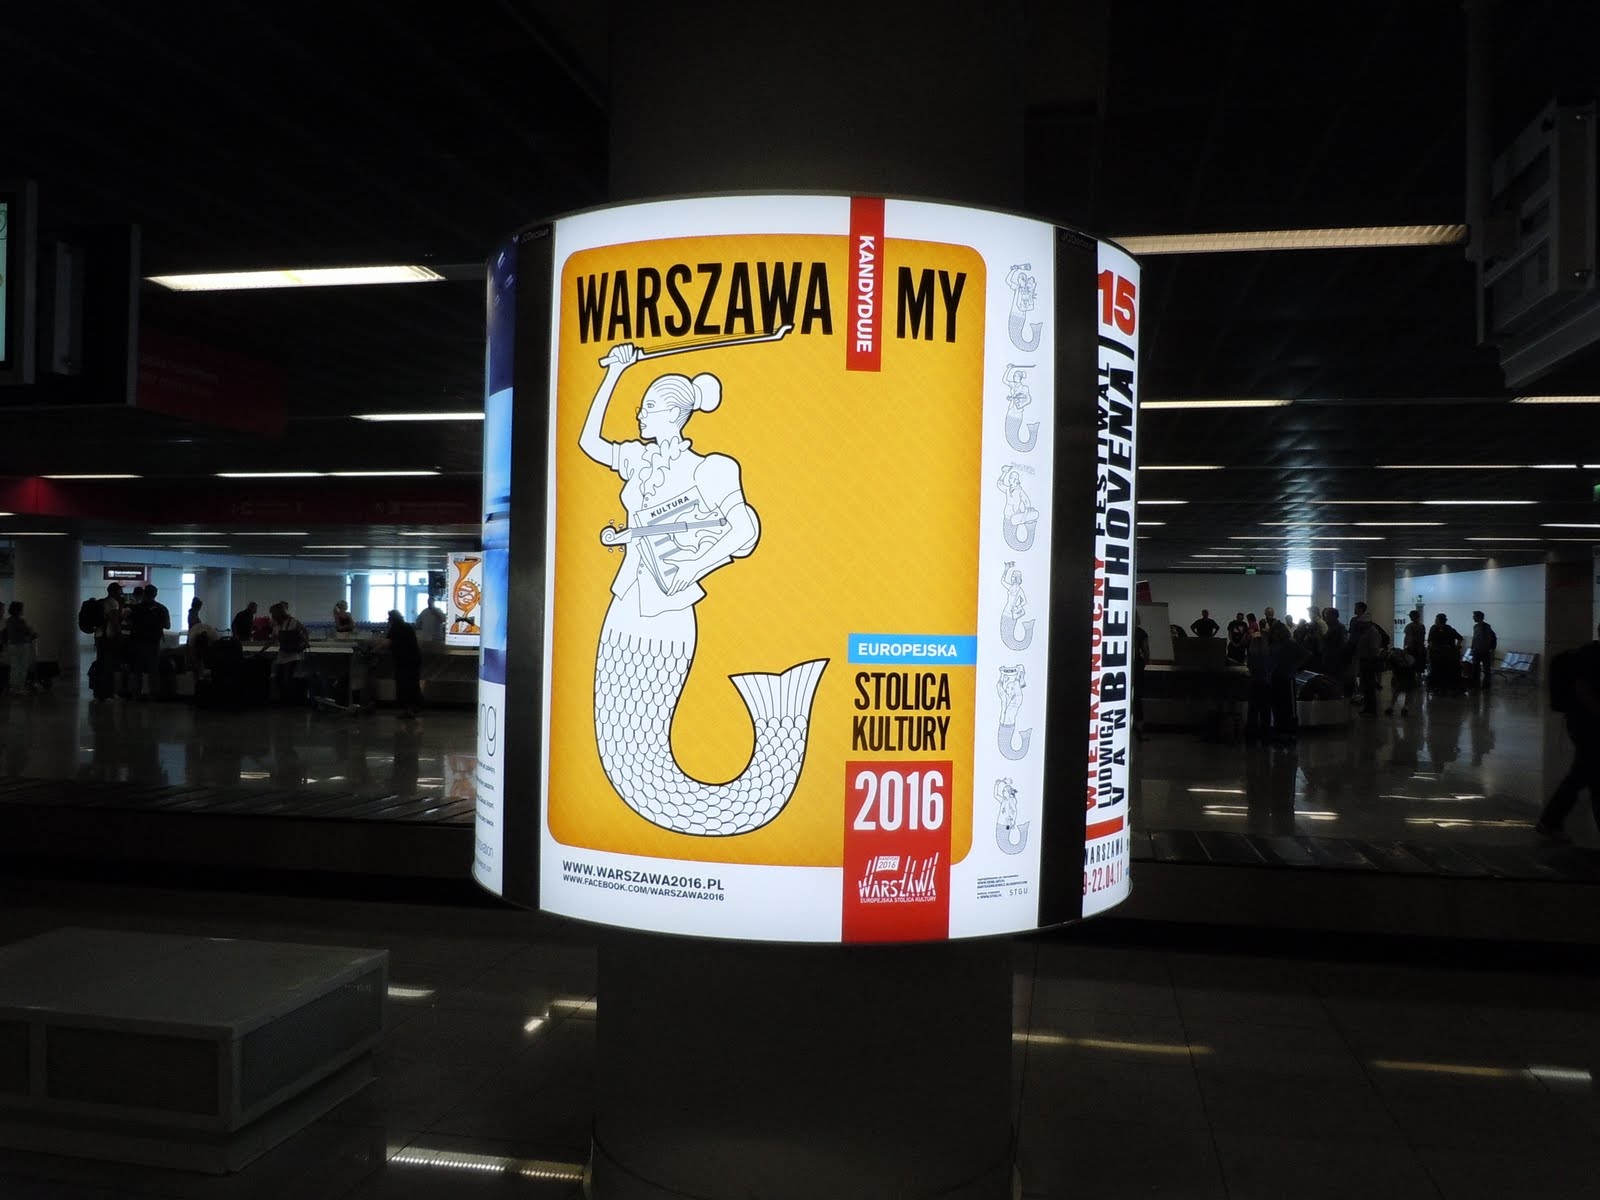 First Mermaid Sighting...at the Warsaw Airport